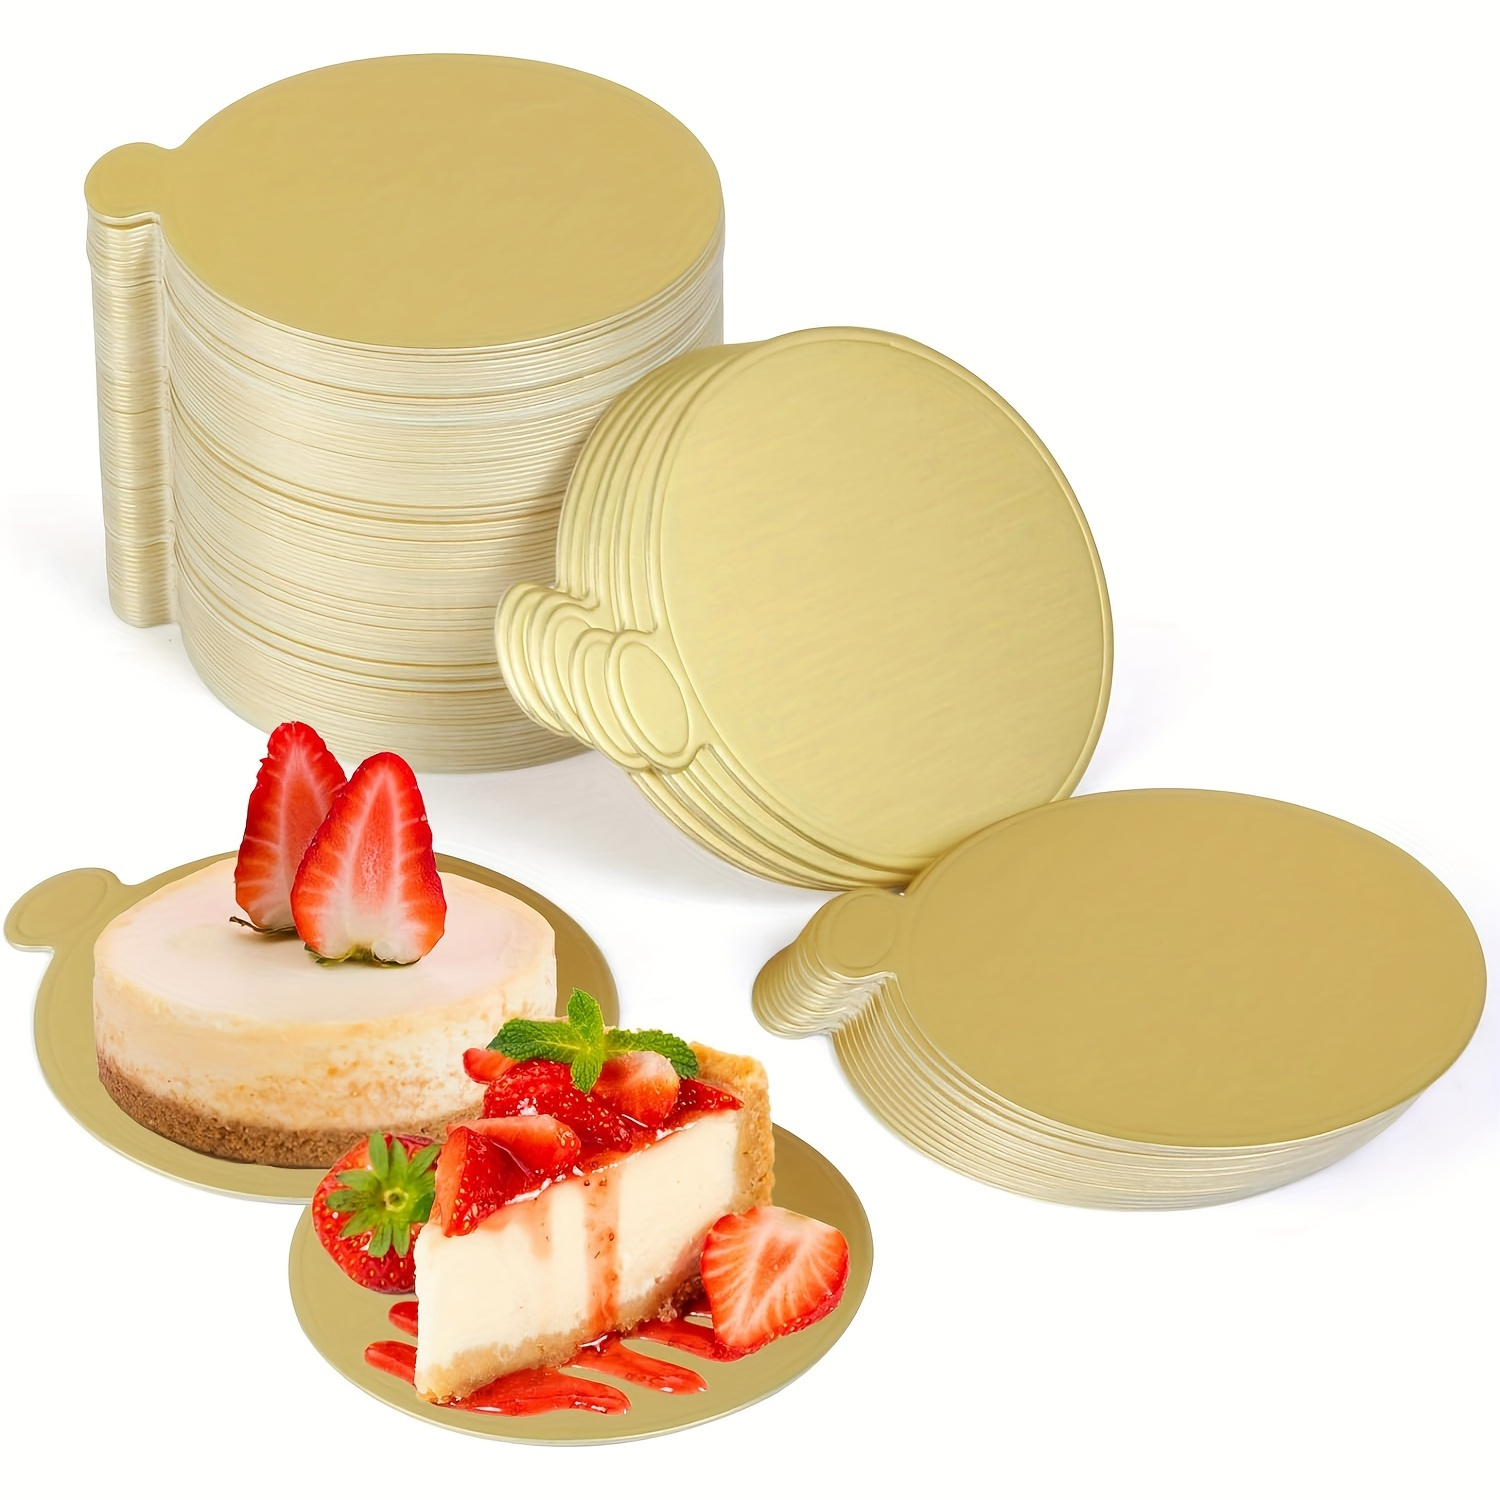 

100pcs Small Cake Bases Mousse Tray Circular Cake Boards Golden Paper Trays 3.5 Inch